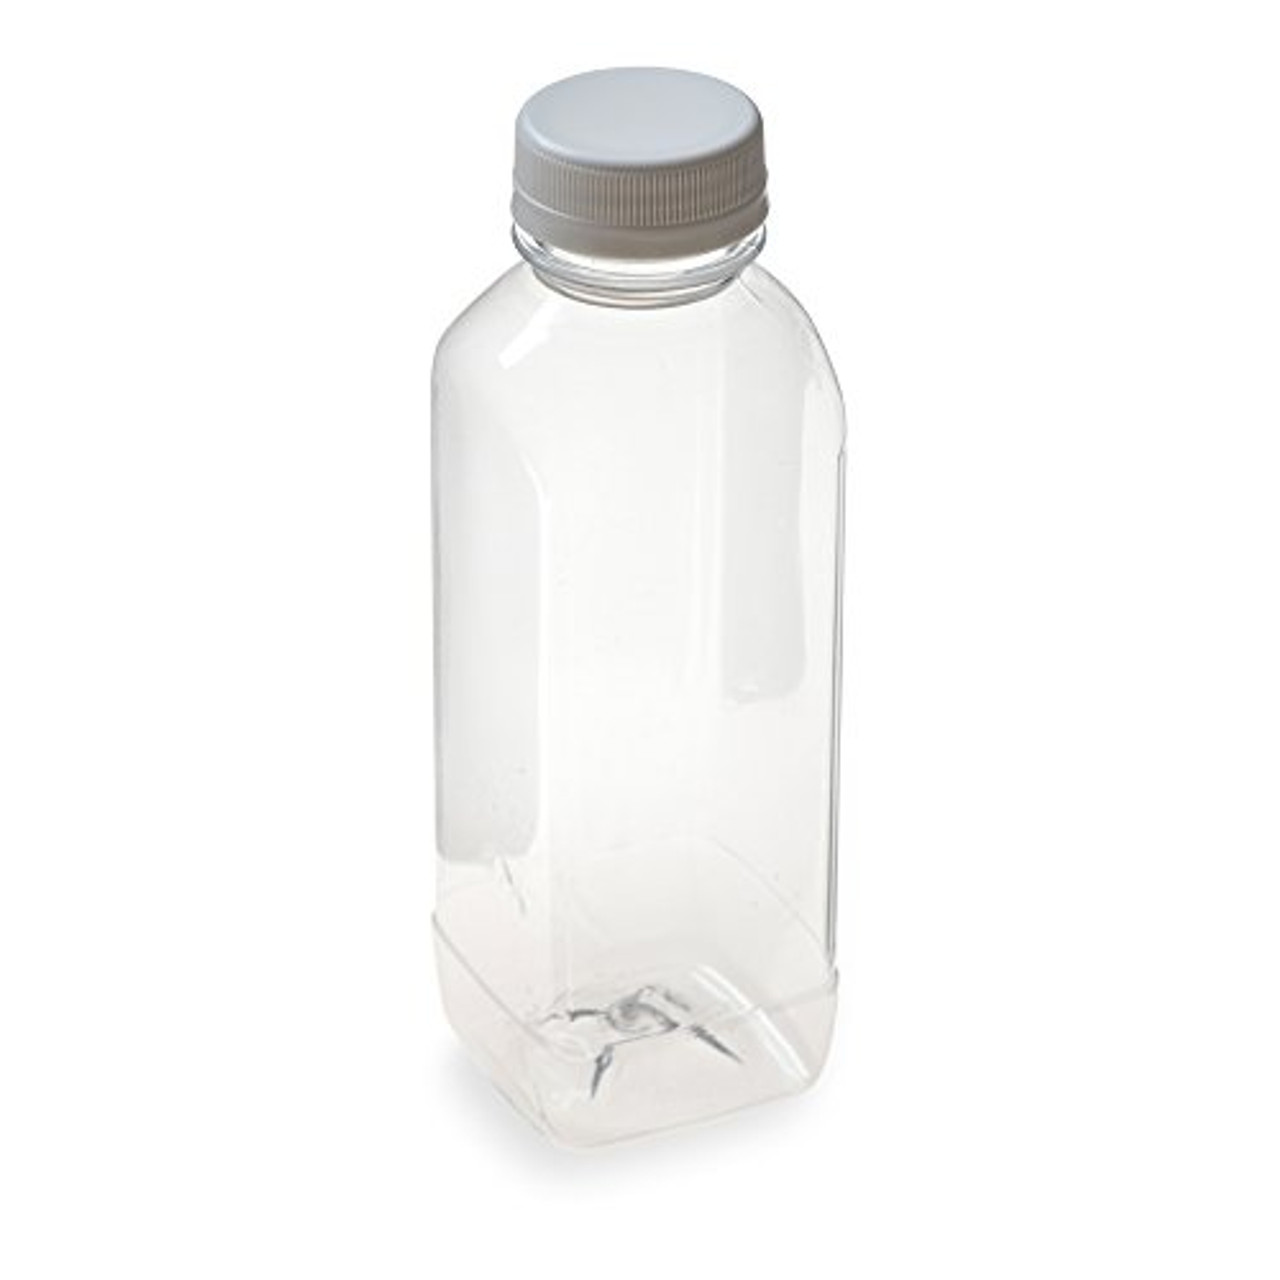 Stock Your Home 12 oz Glass Juice Bottles with Caps (4 Pack) - Reusable Glass Bottles with 8 Tamper Proof Snap-On Caps - Food Gr